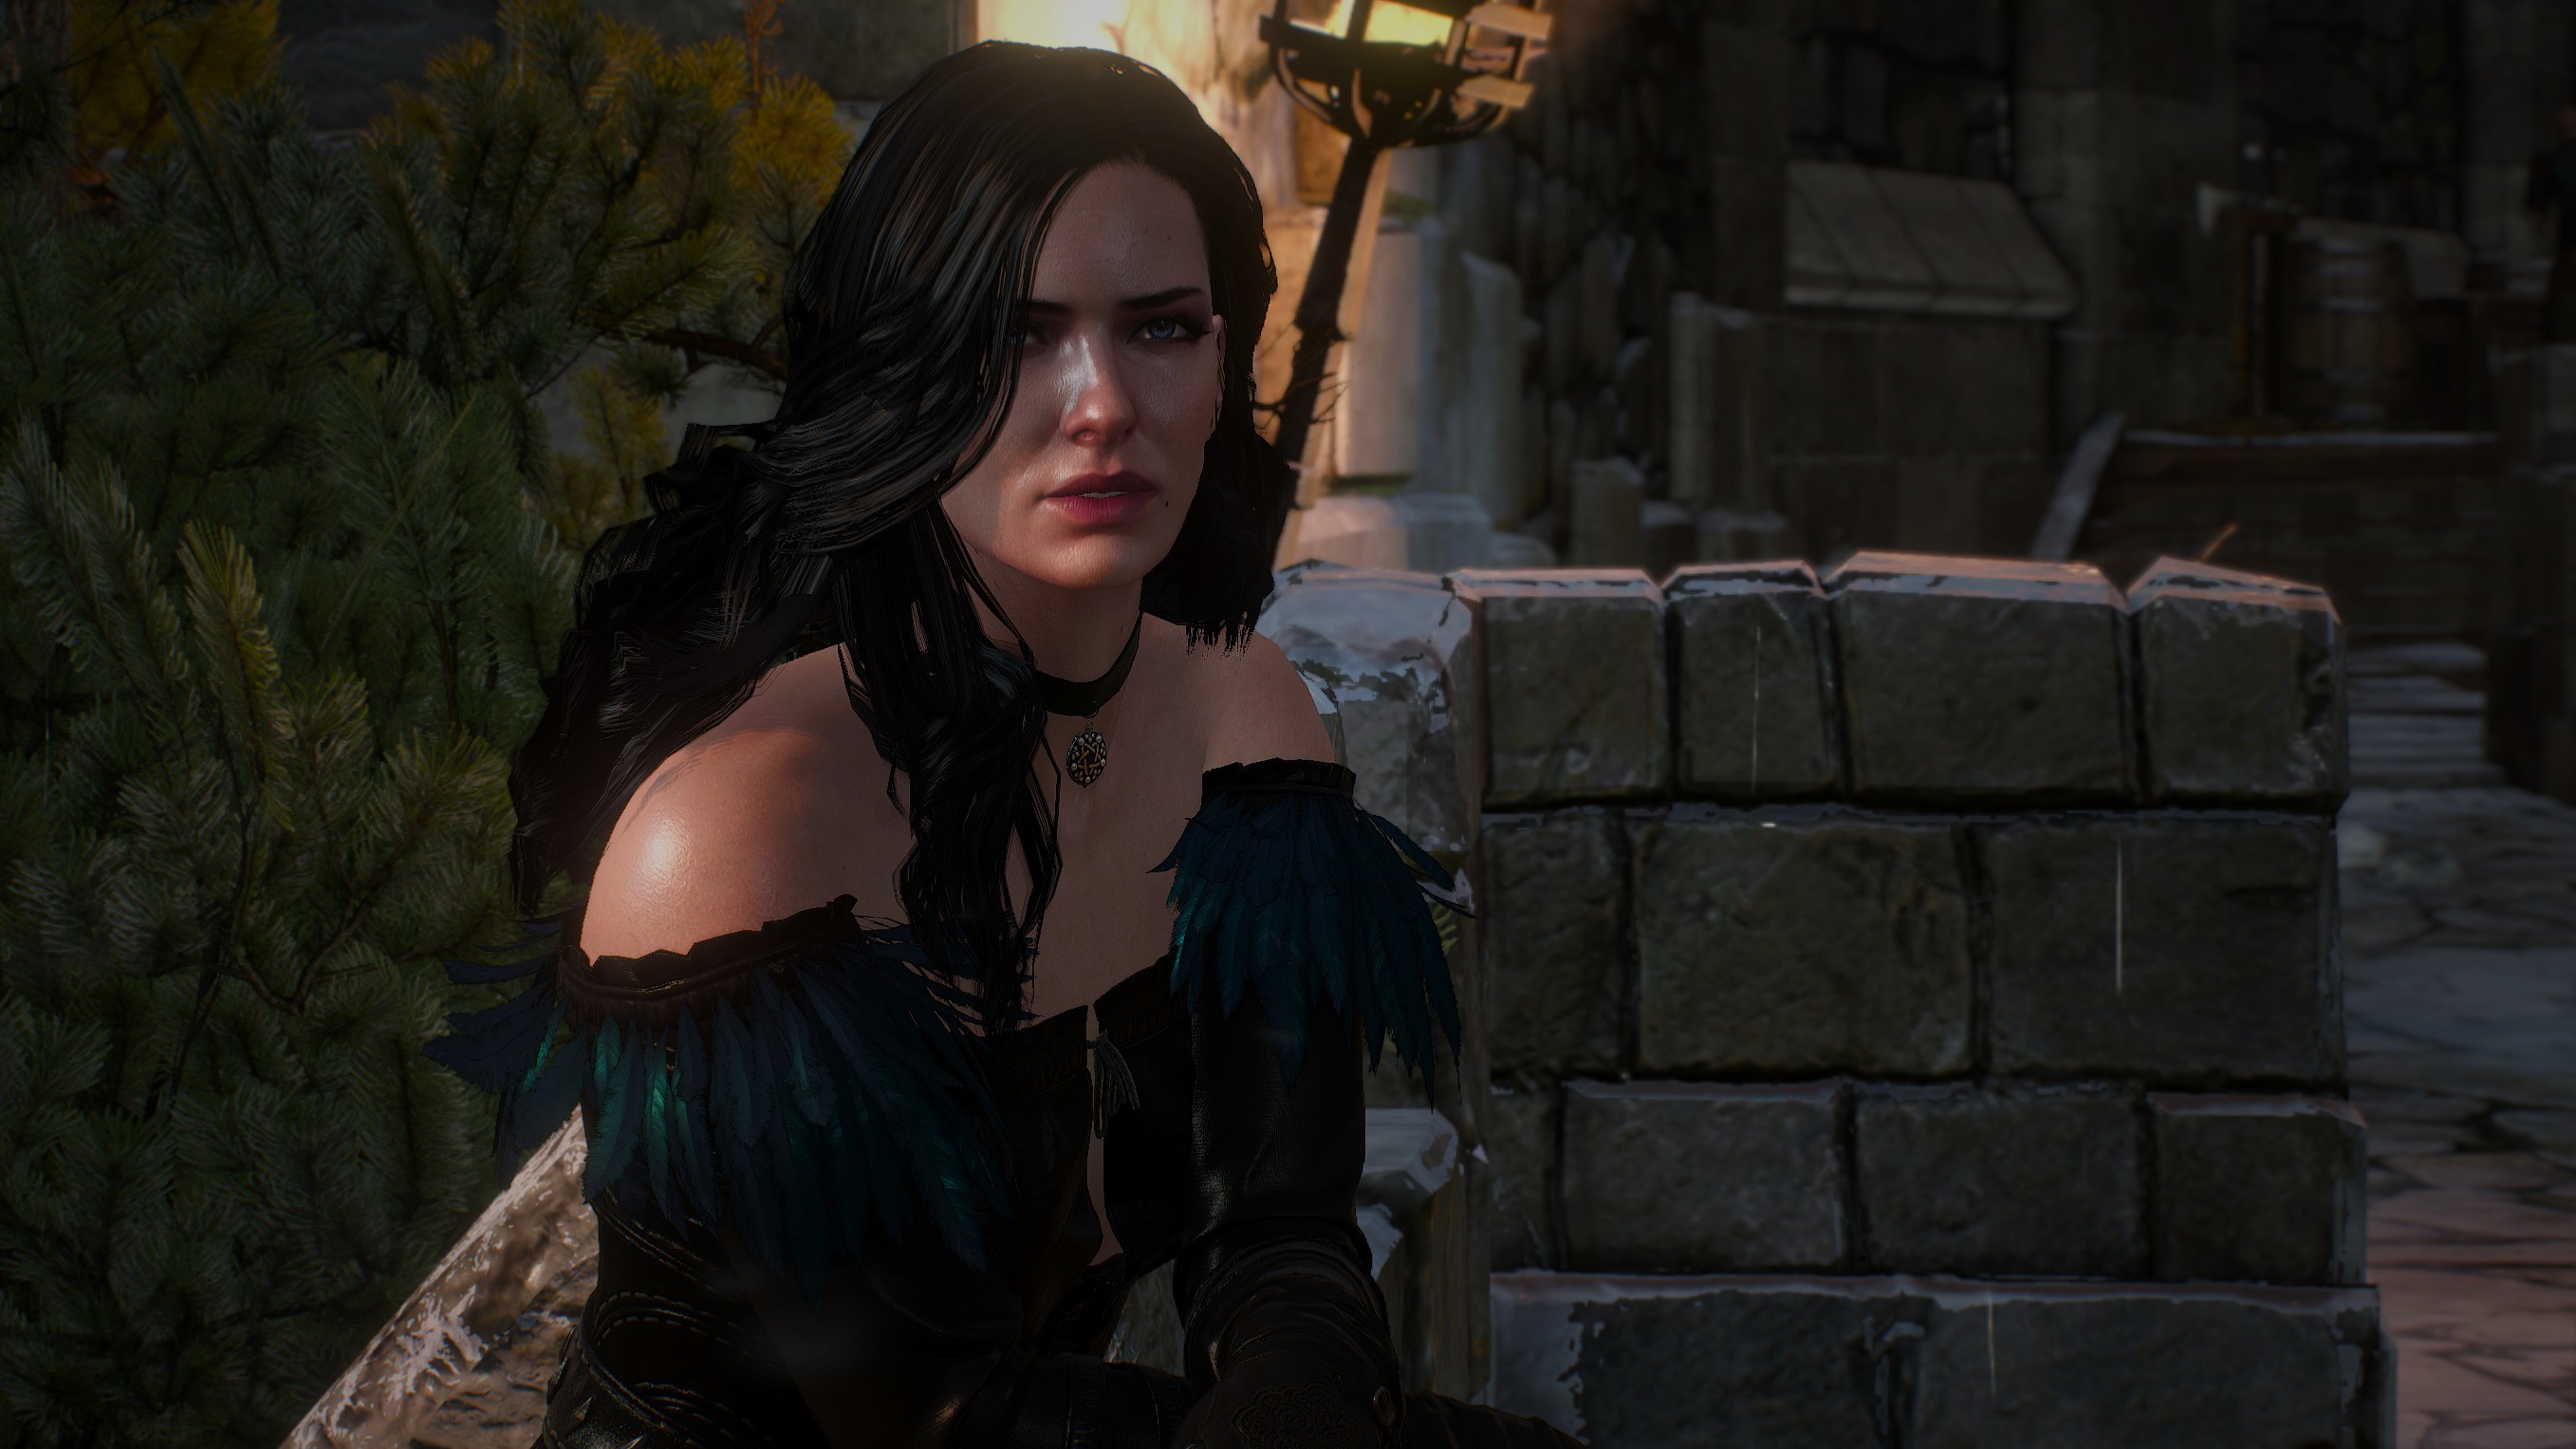 General 2715x1527 The Witcher 3: Wild Hunt Skellige Yennefer of Vengerberg RPG video games PC gaming screen shot video game girls video game characters CD Projekt RED